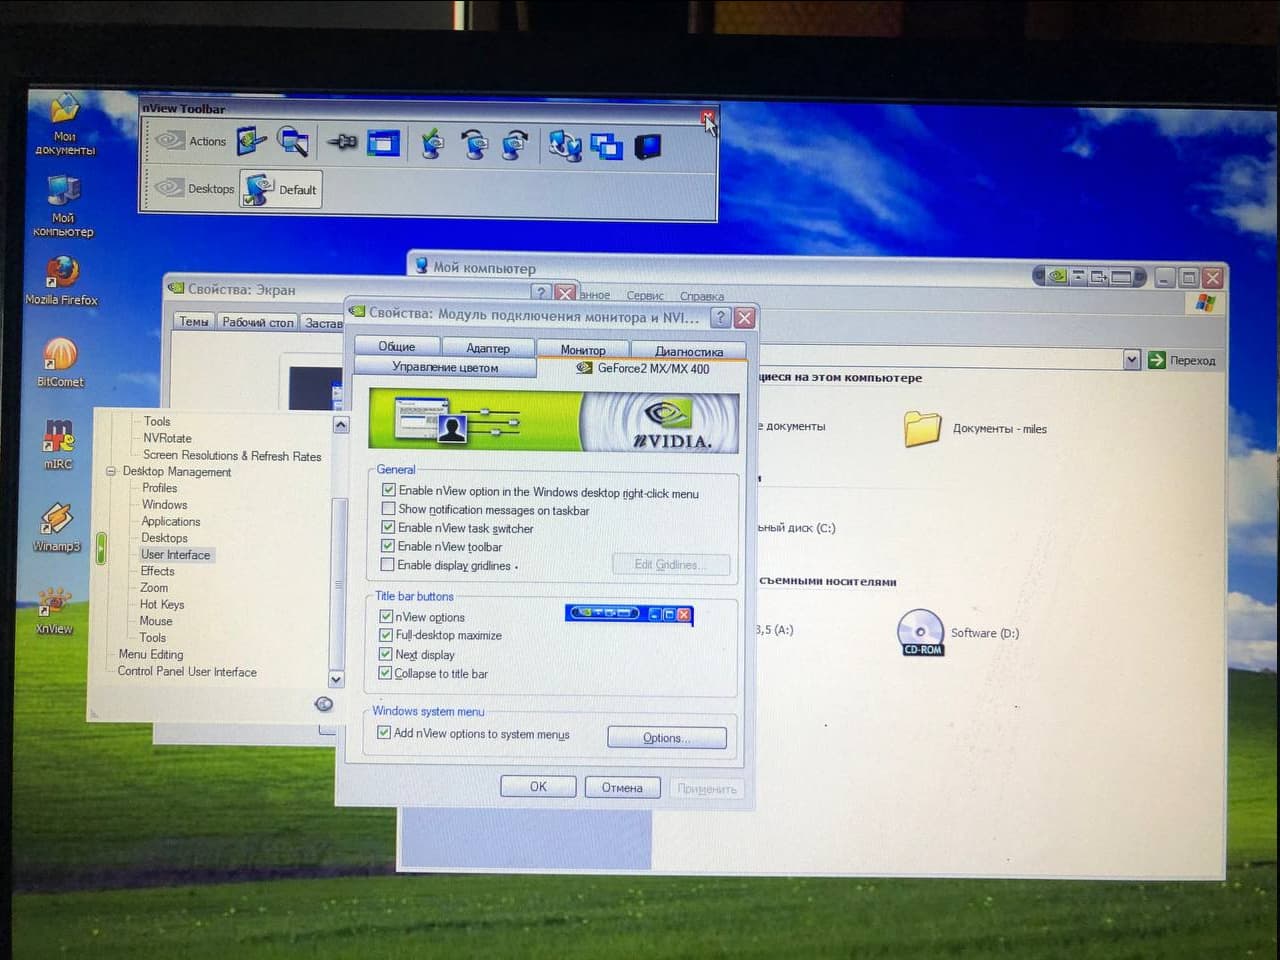 The best video editor for really old PCs (and works with Windows XP) -  Technology - MessengerGeek